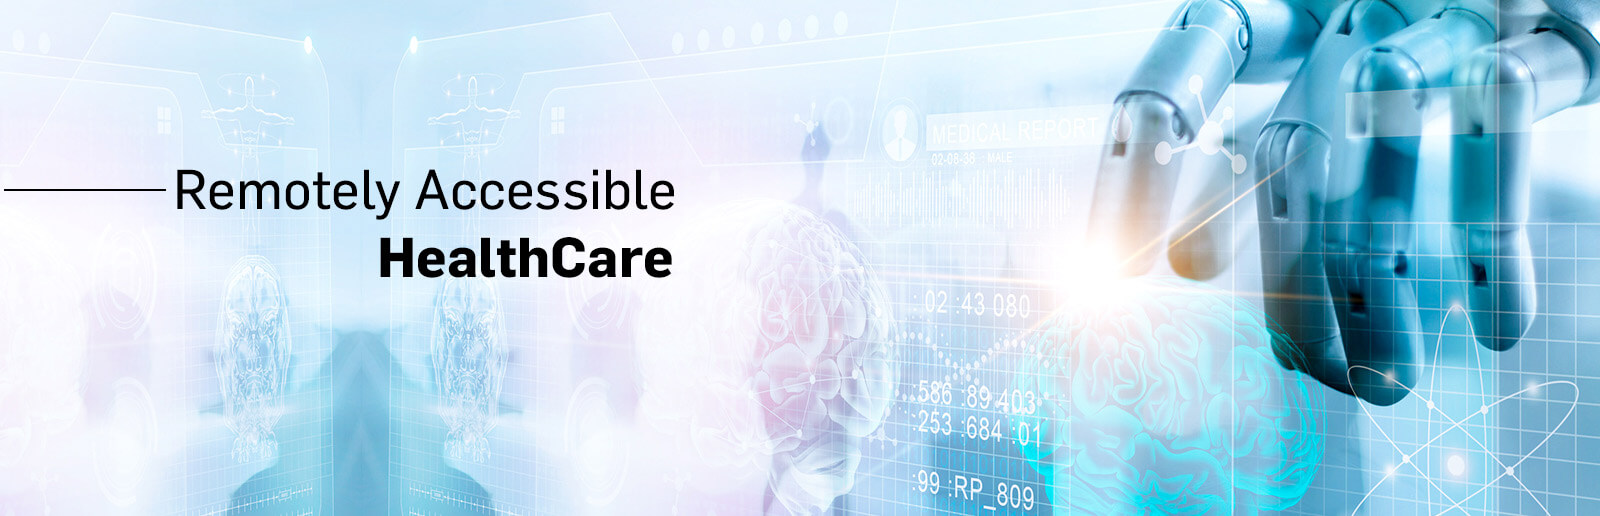 Remotely Accessible Healthcare